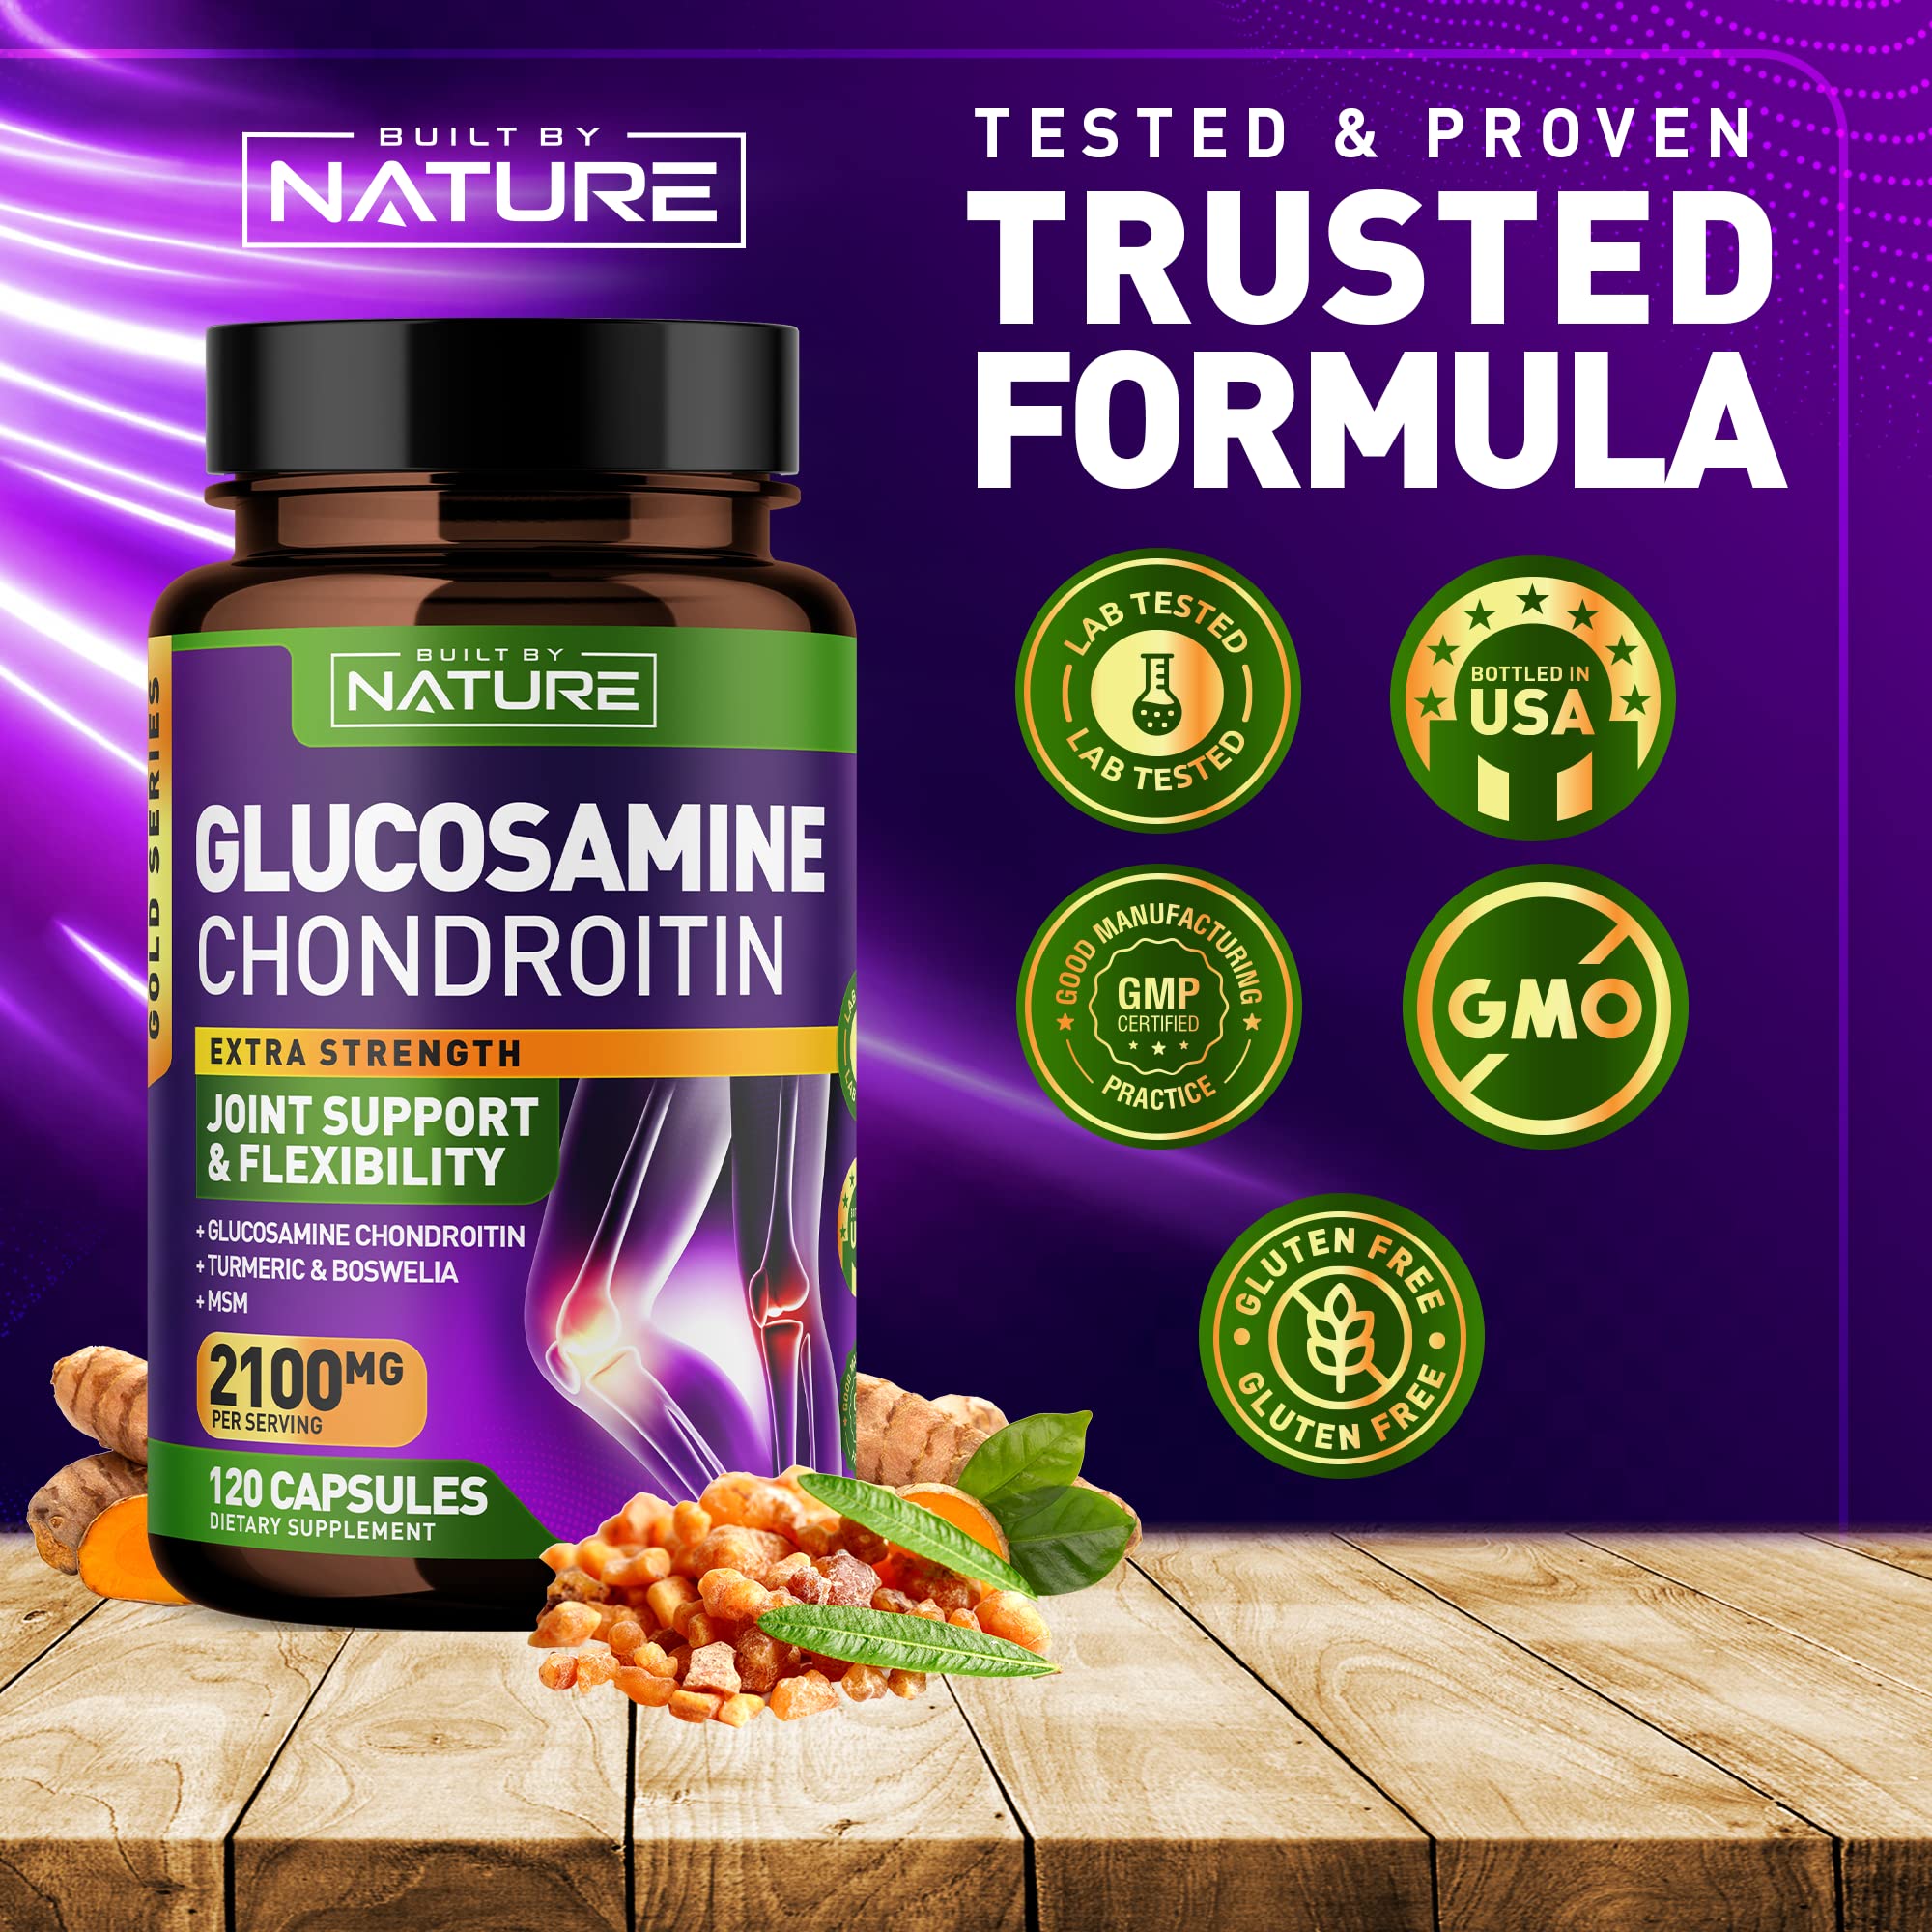 Glucosamine Chondroitin with MSM, Turmeric, Boswellia - Advanced Joint Support Supplement, High Potency Antioxidant, Comfort for Back, Knees, Hands, Non GMO, 120 Extended Delivery Capsules